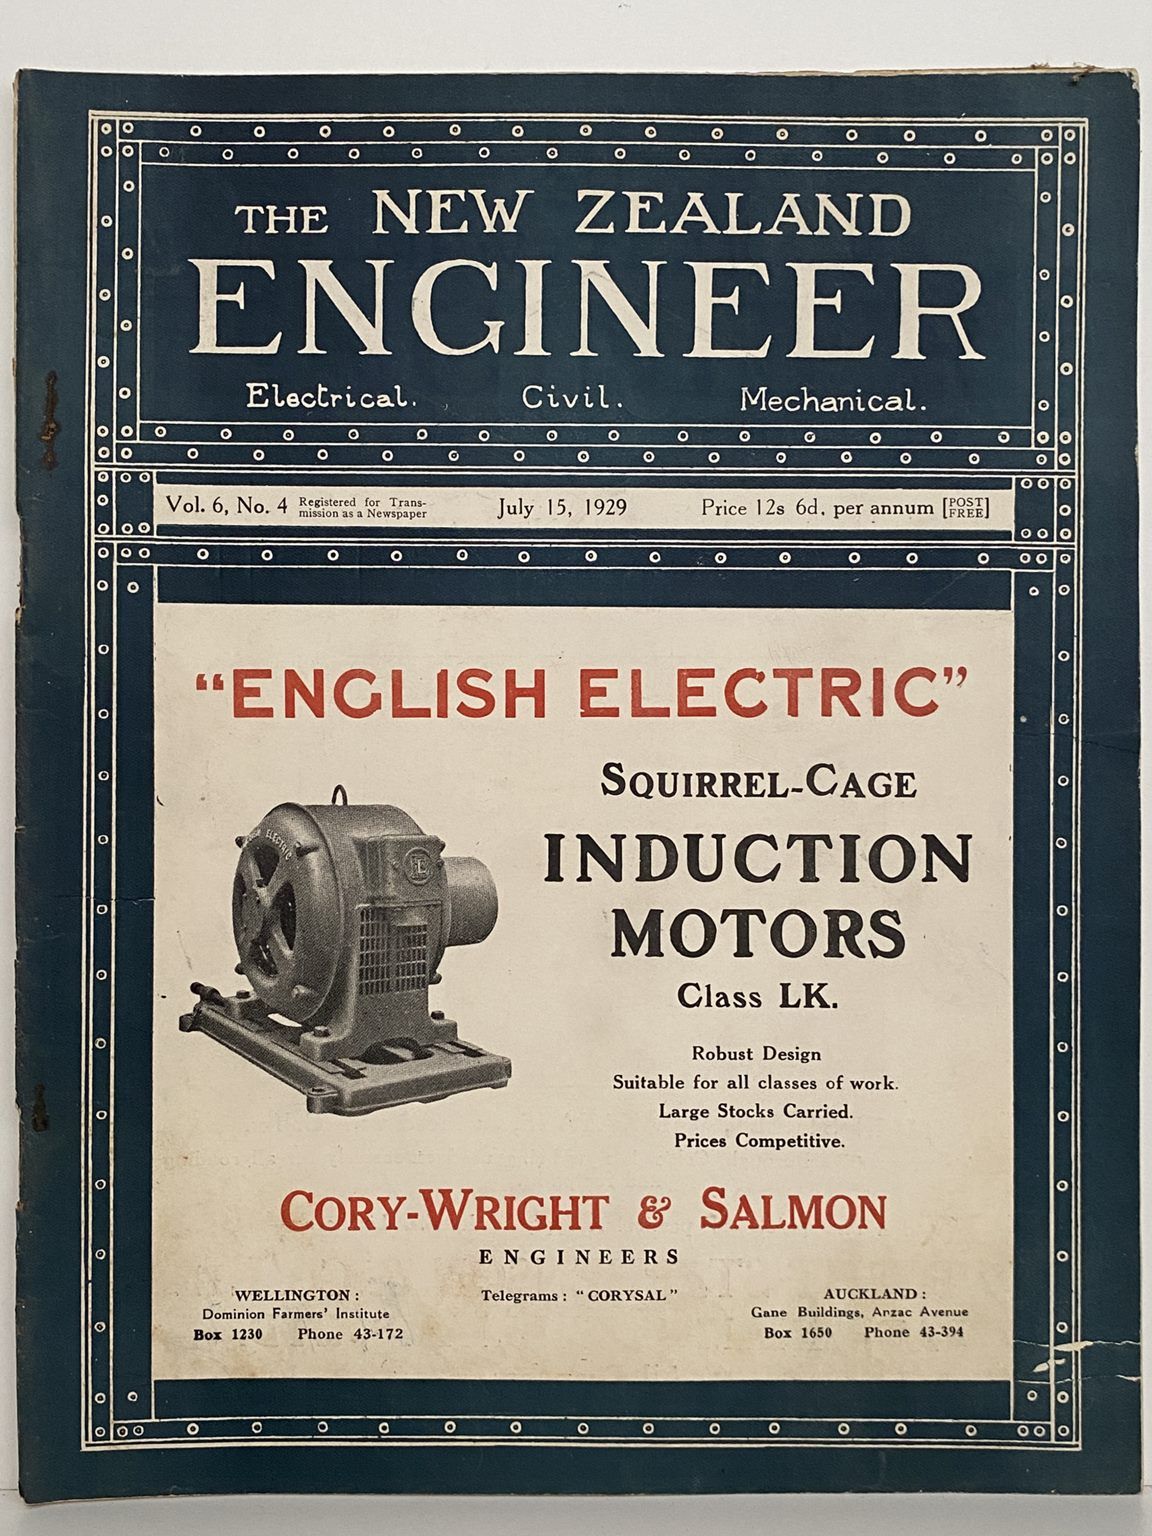 OLD MAGAZINE: The New Zealand Engineer Vol. 6, No. 4 - 15 July 1929